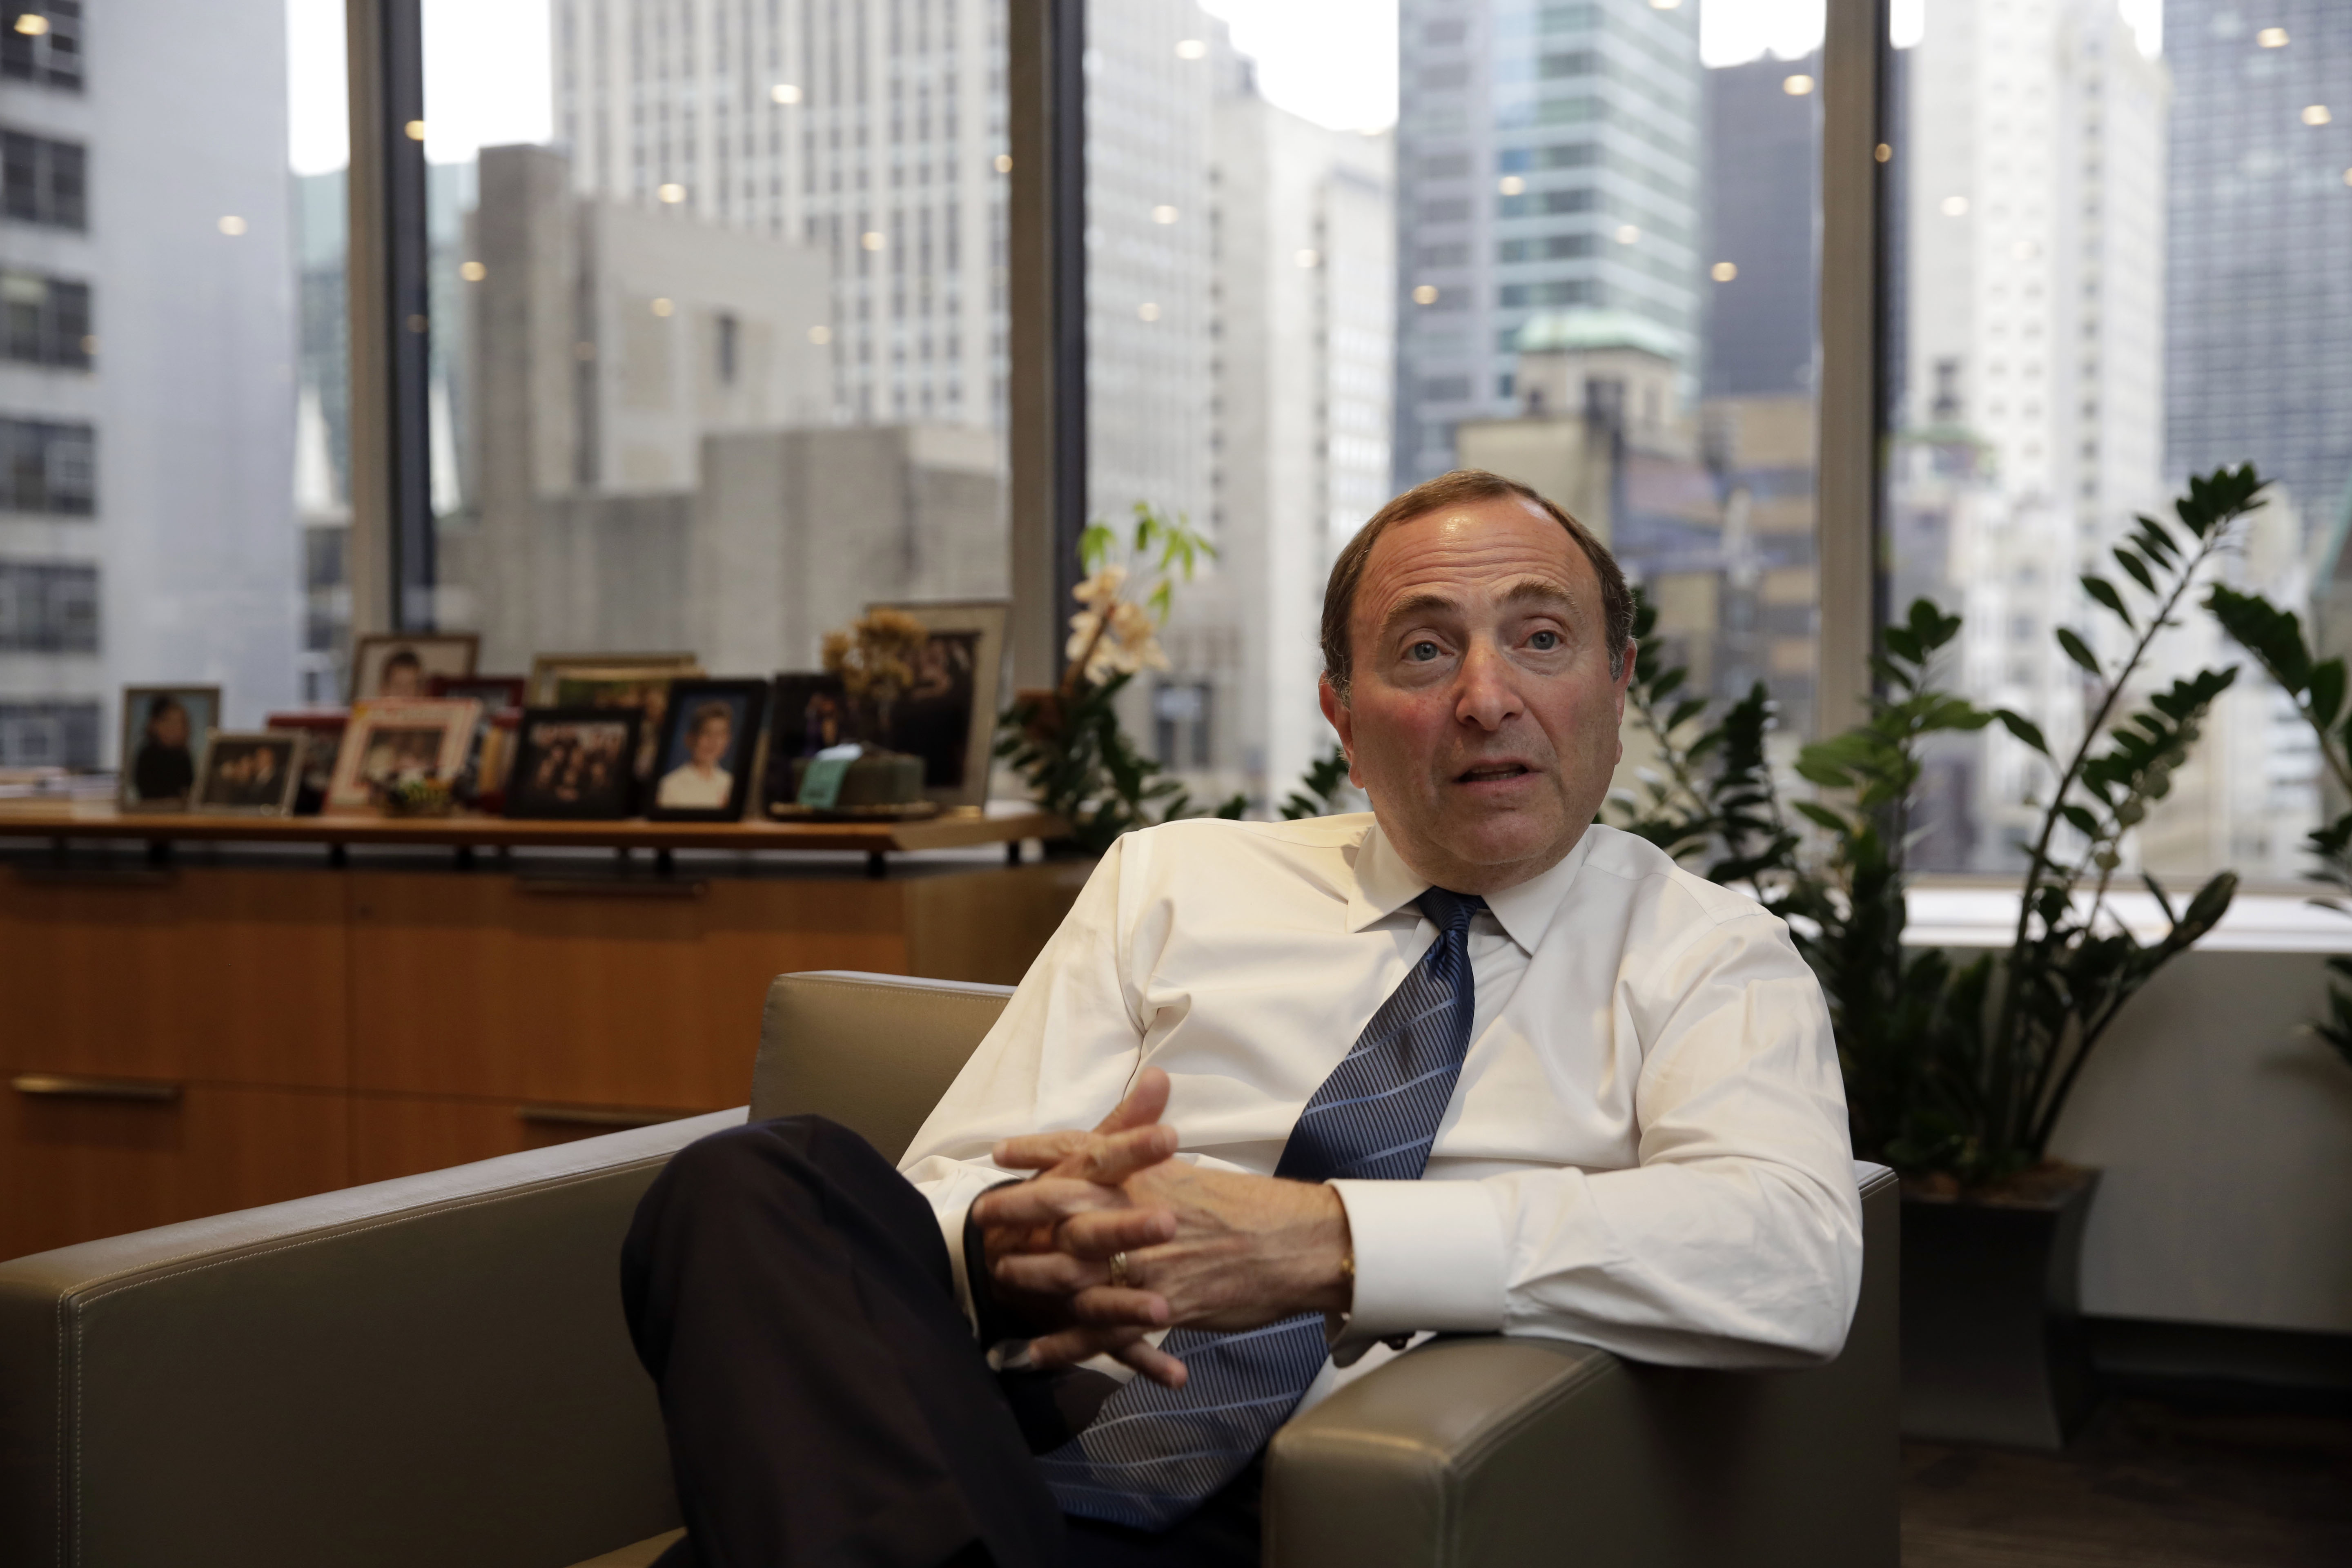 NHL Commissioner Gary Bettman (R) listens to a question during a